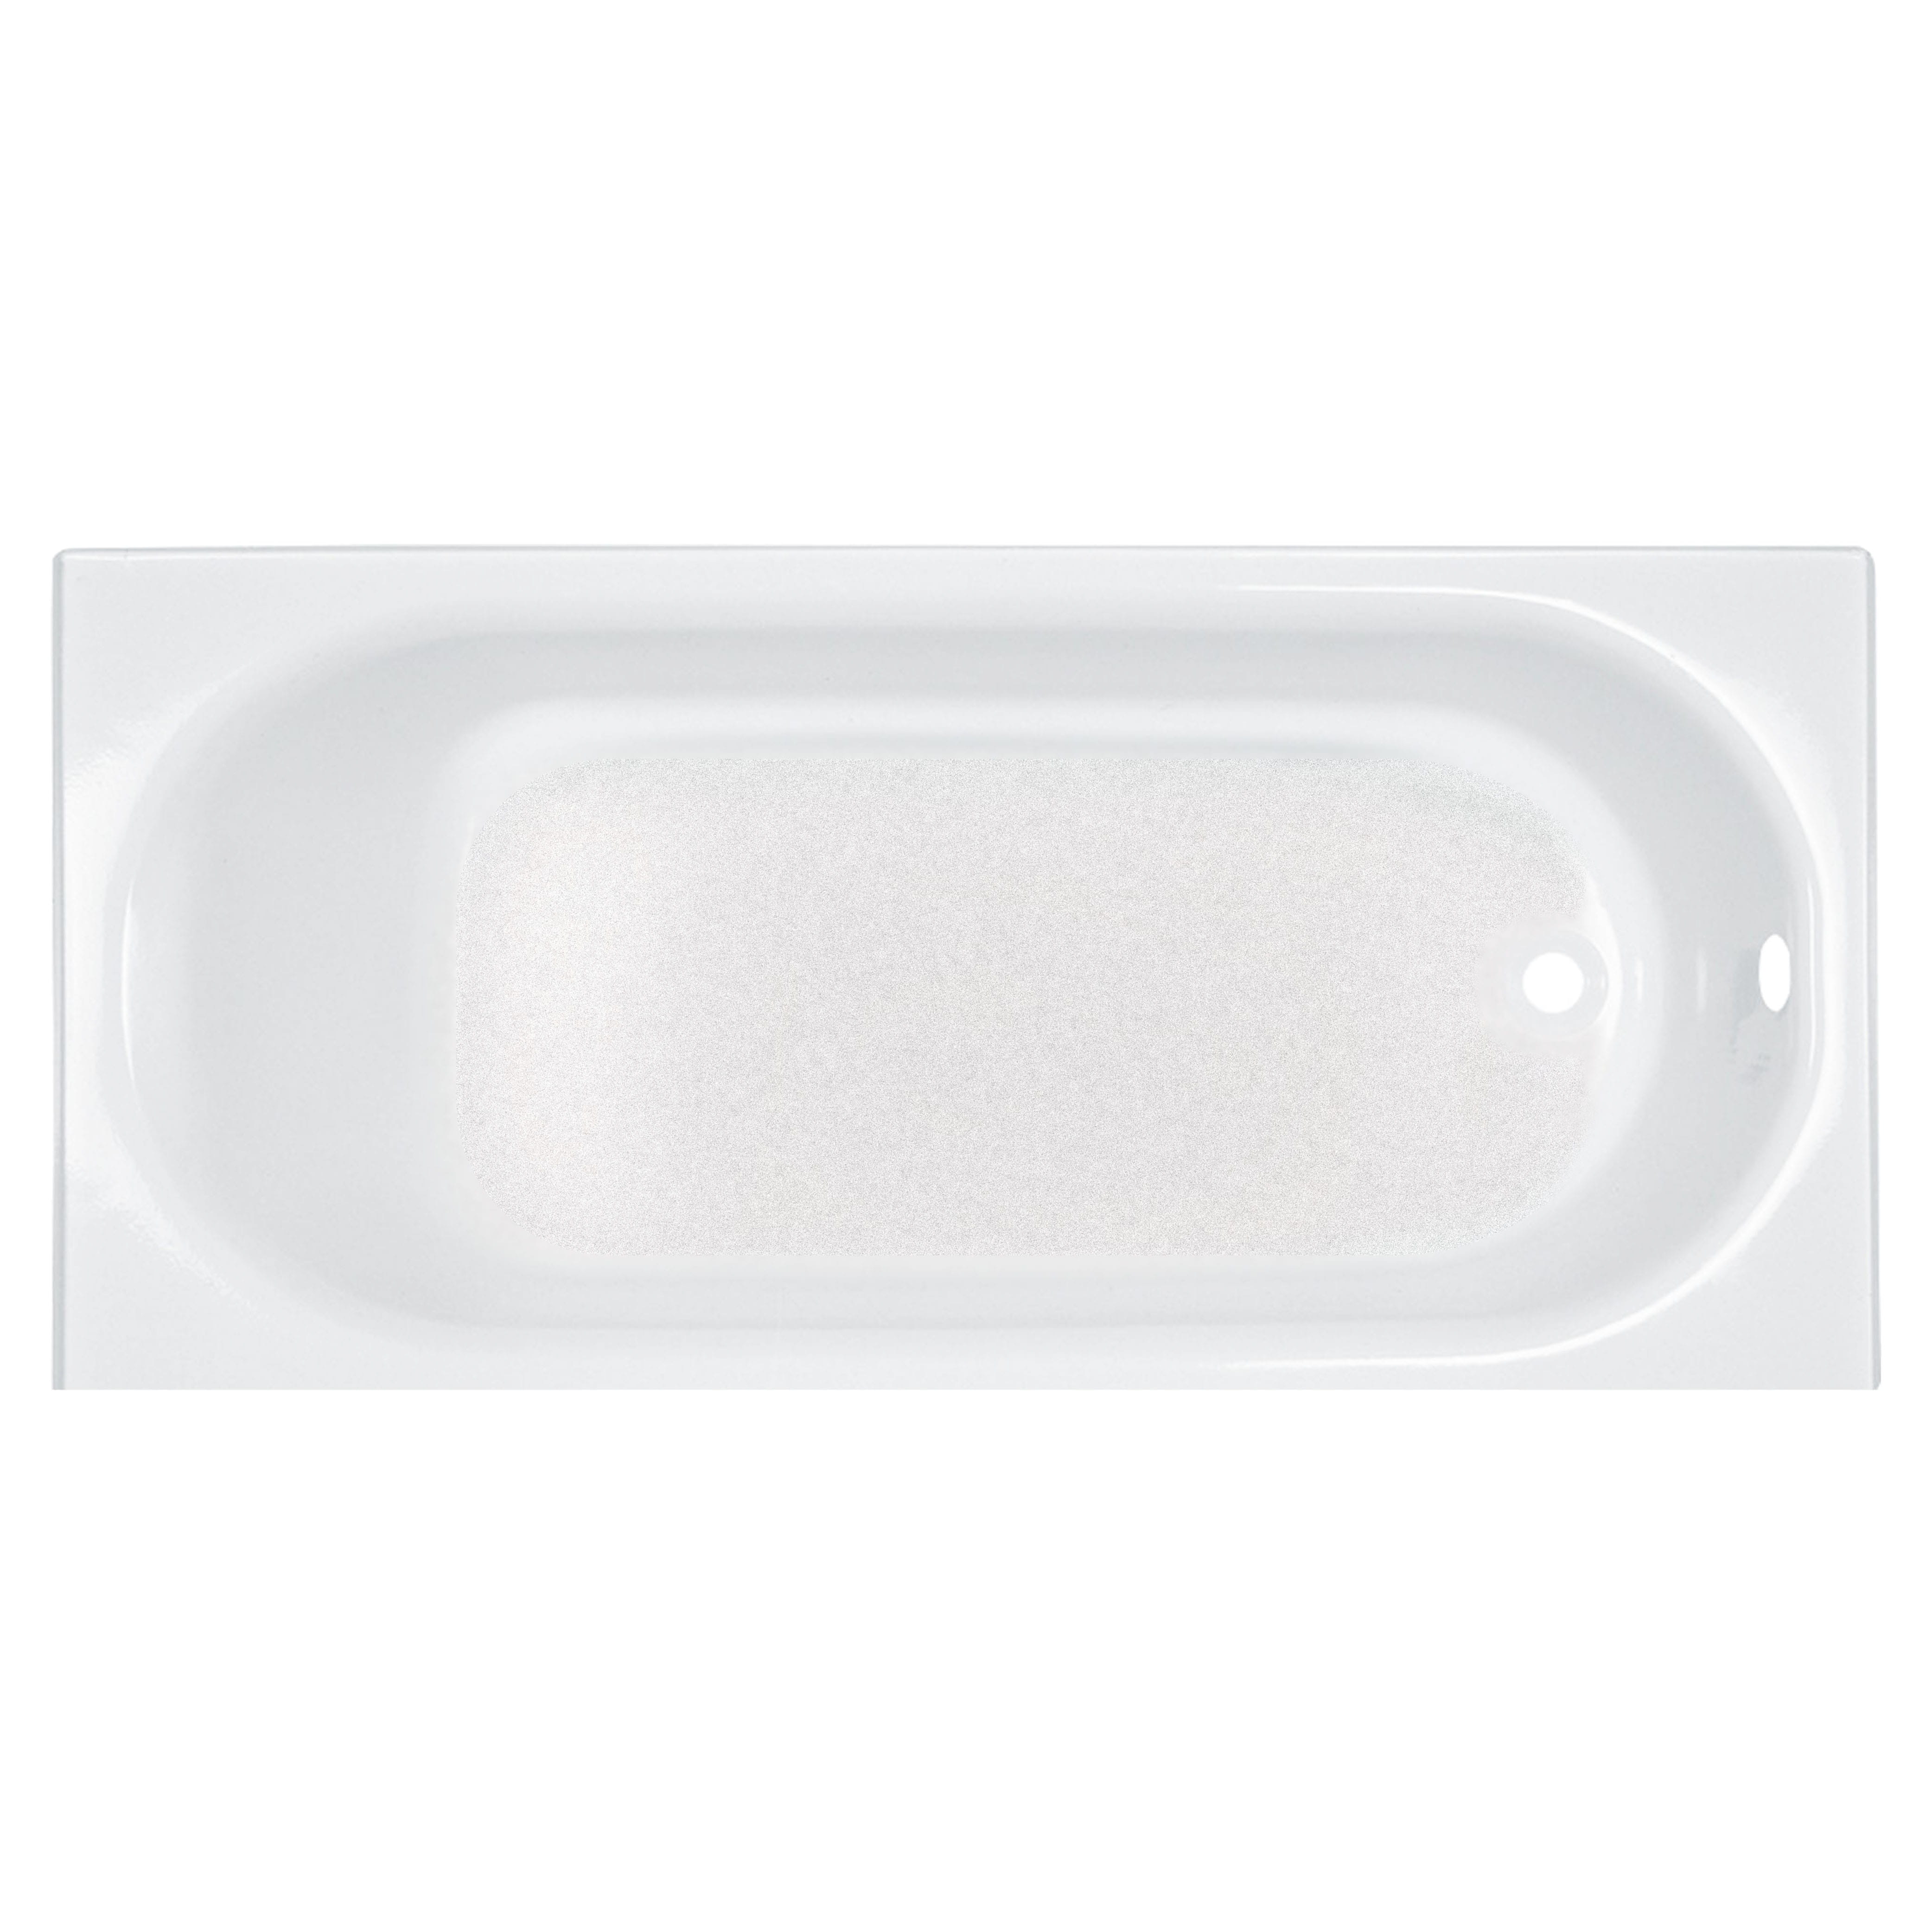 Princeton Americast 60 x 30 Inch Integral Apron Bathtub With Right Hand Outlet ARCTIC